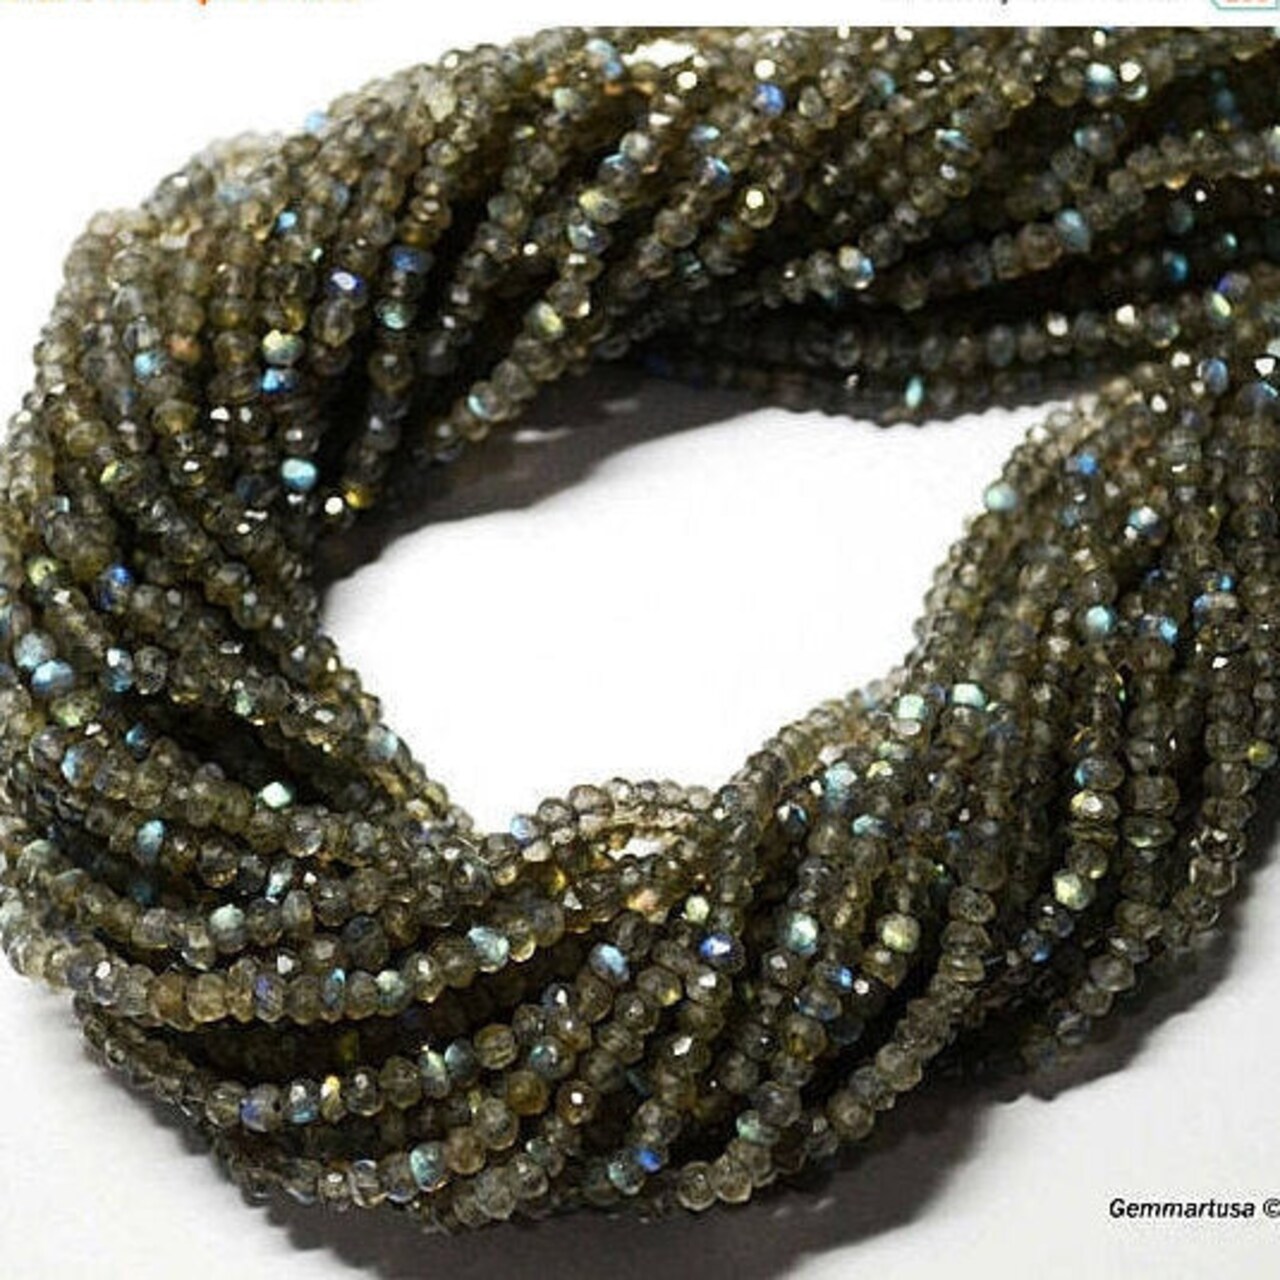 Labradorite Micro Faceted Rondelle 3-4mm 13Inch Length AAAmazing quality 100 Percent Natural (RLLB-70002)